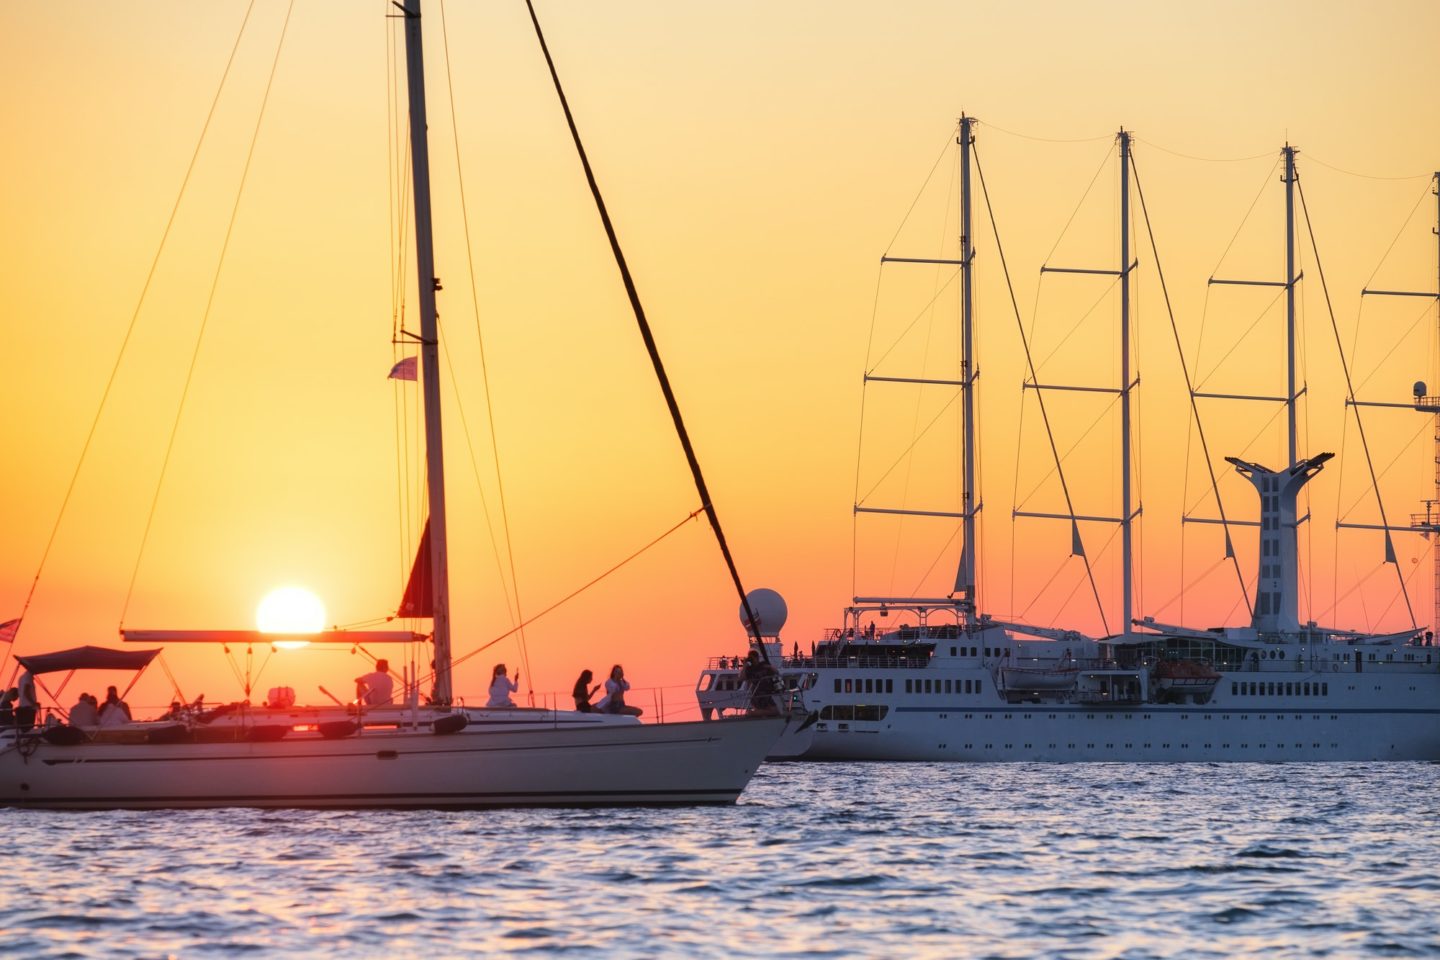 Sailing yachts during sunset. Silhouettes of yachts against the sun.